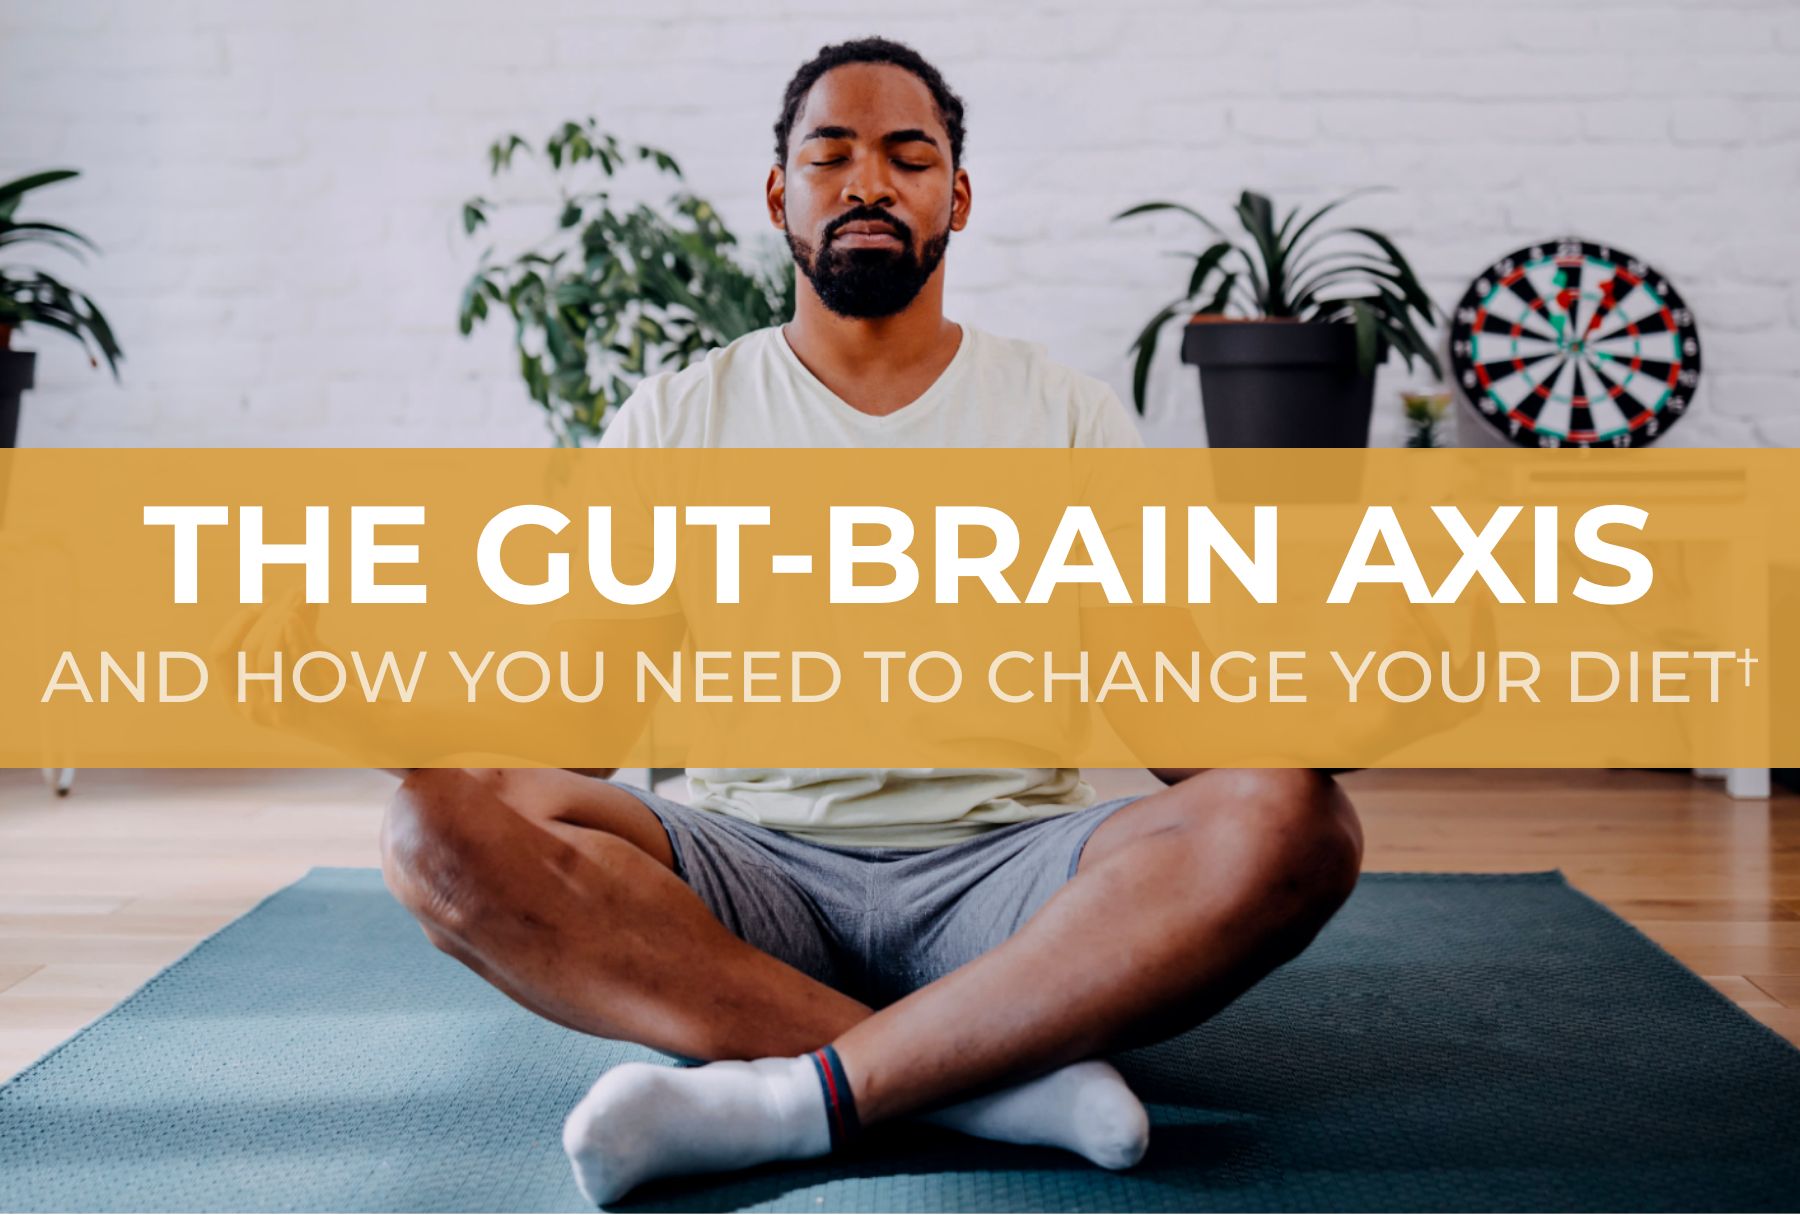 The Gut-Brain Axis and How You Need to Change Your Diet